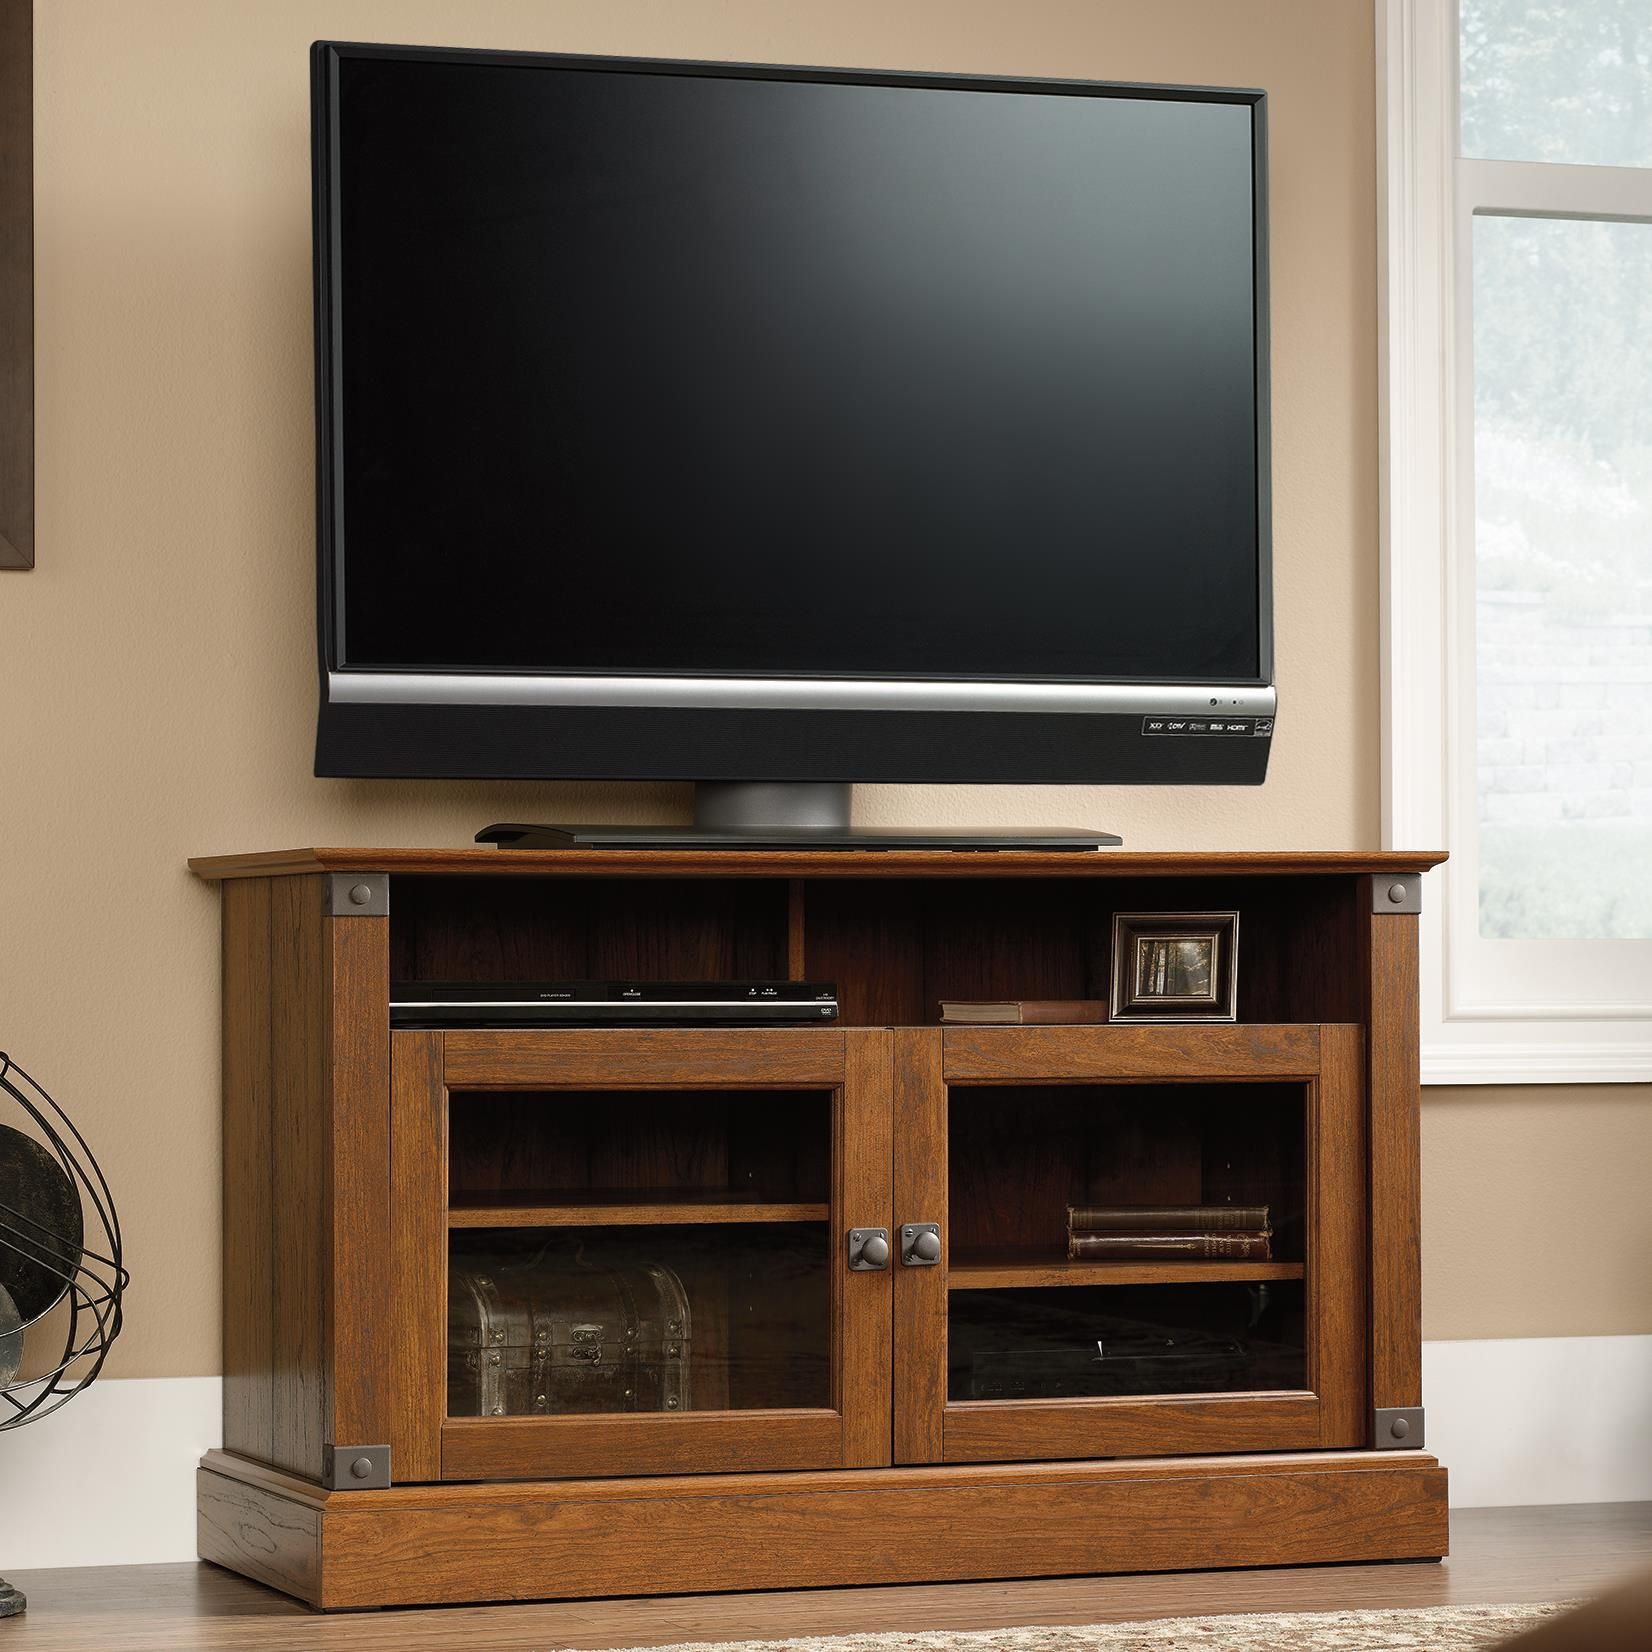 Sauder Carson Forge 412921 Rustic Style Panel Tv Stand Pertaining To Industrial Style Tv Stands (View 3 of 15)